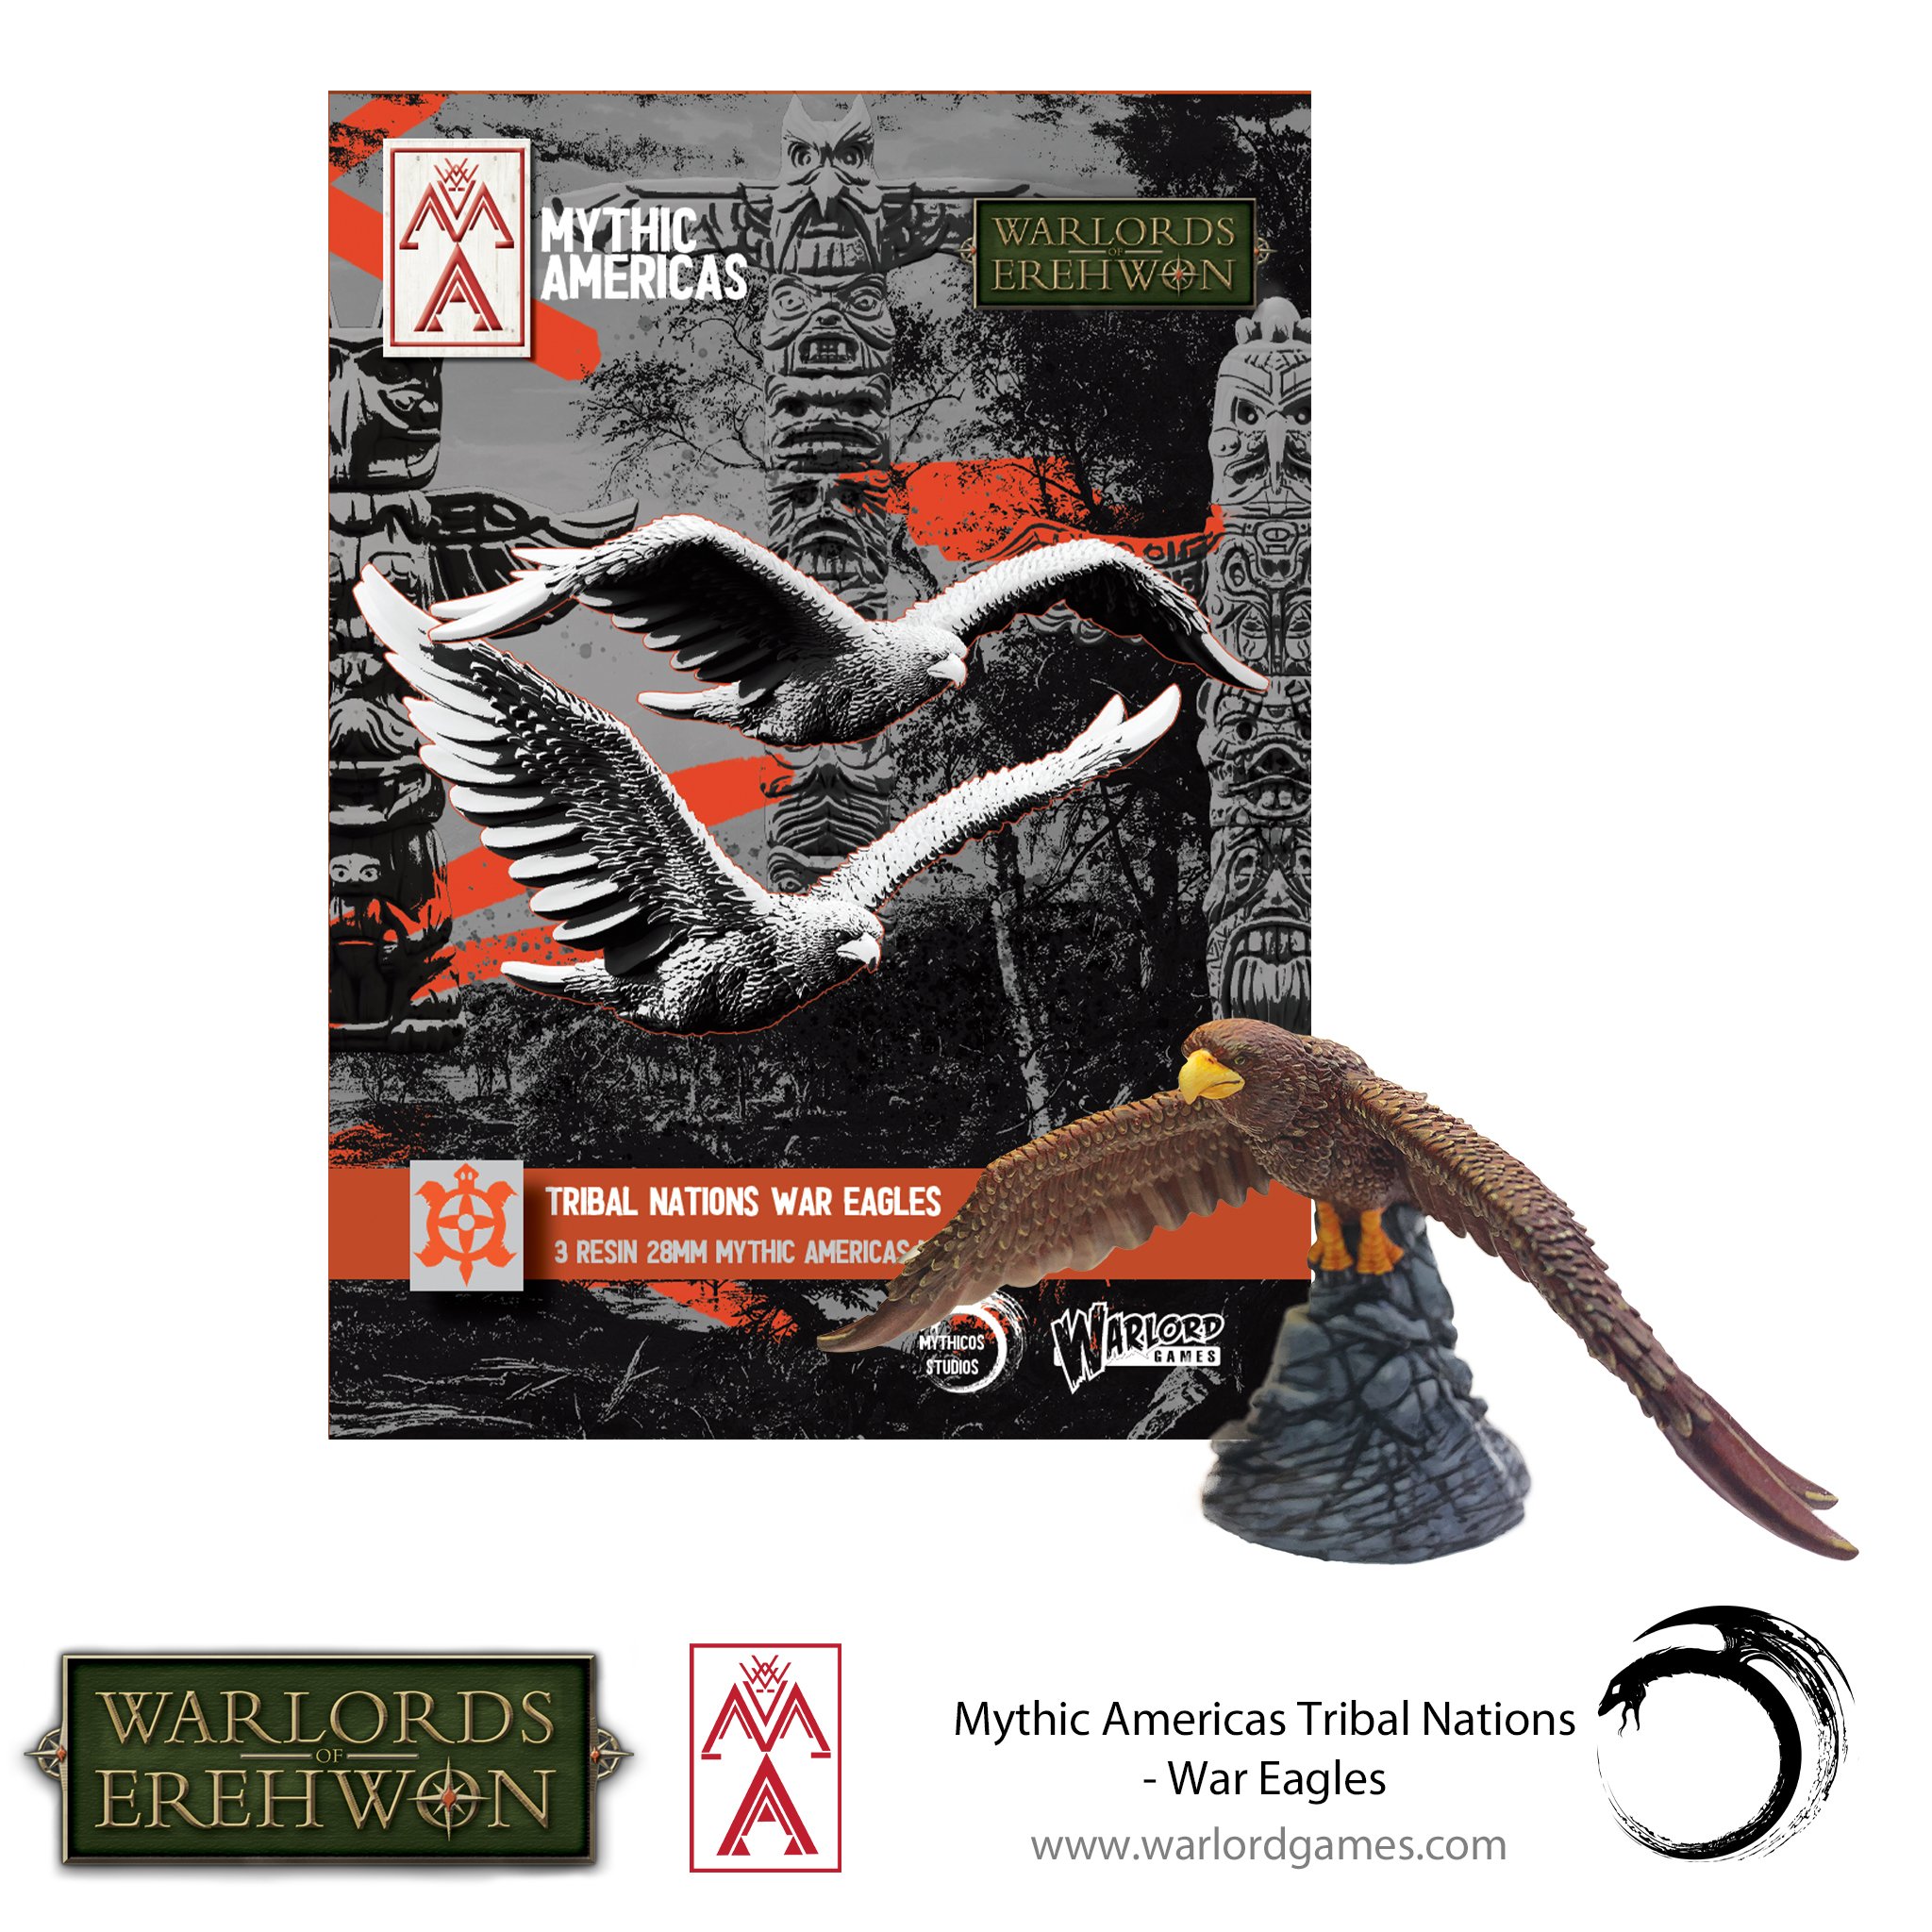 Warlords of Erehwon: Mythic Americas- Tribal Nations: War Eagles 